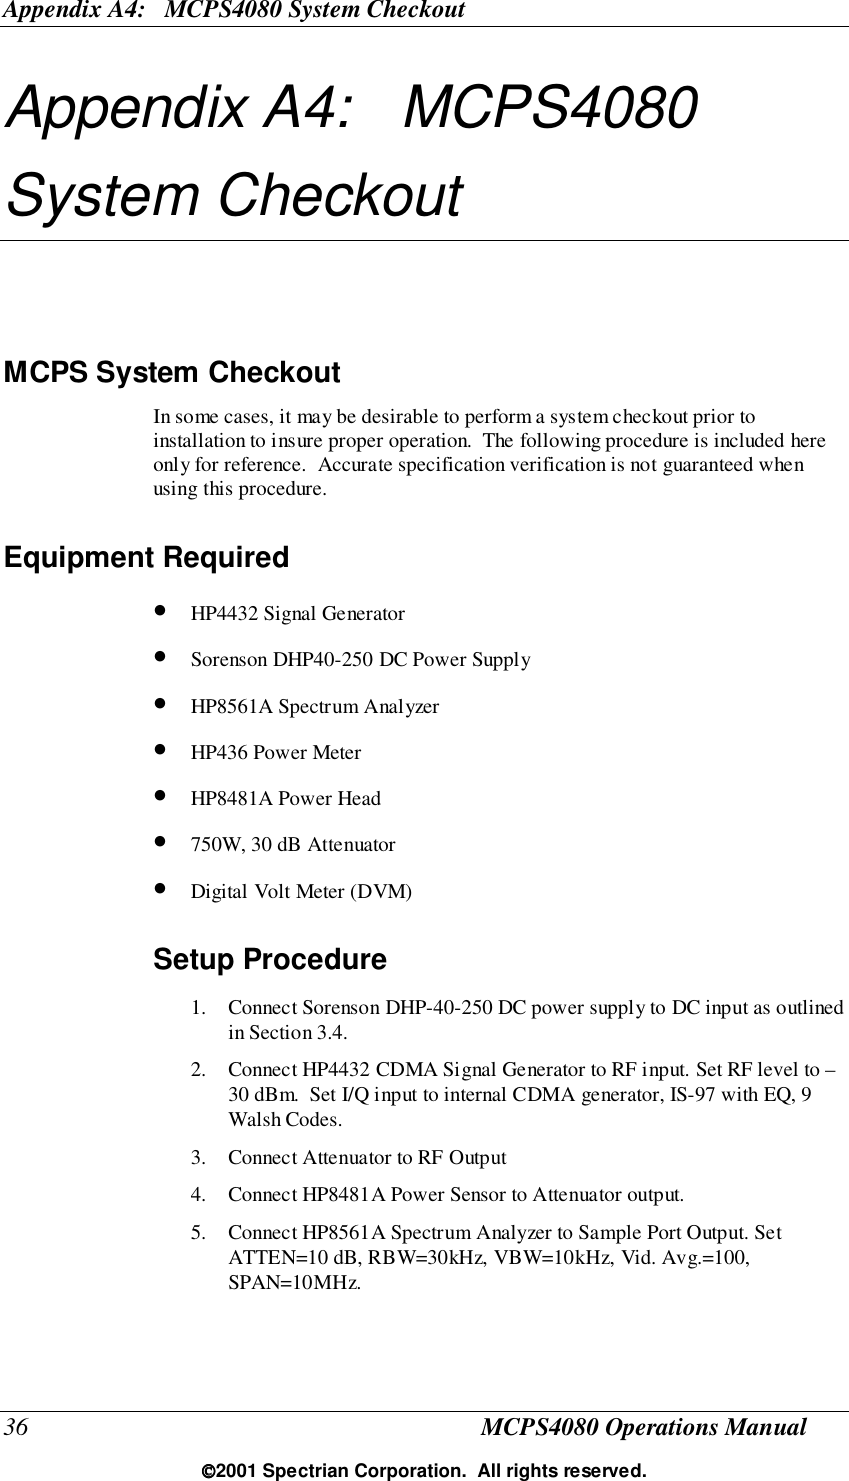 Appendix A4:   MCPS4080 System Checkout36 MCPS4080 Operations Manual2001 Spectrian Corporation.  All rights reserved.Appendix A4:   MCPS4080System CheckoutMCPS System CheckoutIn some cases, it may be desirable to perform a system checkout prior toinstallation to insure proper operation.  The following procedure is included hereonly for reference.  Accurate specification verification is not guaranteed whenusing this procedure.Equipment Required• HP4432 Signal Generator• Sorenson DHP40-250 DC Power Supply• HP8561A Spectrum Analyzer• HP436 Power Meter• HP8481A Power Head• 750W, 30 dB Attenuator• Digital Volt Meter (DVM)Setup Procedure1. Connect Sorenson DHP-40-250 DC power supply to DC input as outlinedin Section 3.4.2. Connect HP4432 CDMA Signal Generator to RF input. Set RF level to –30 dBm.  Set I/Q input to internal CDMA generator, IS-97 with EQ, 9Walsh Codes.3. Connect Attenuator to RF Output4. Connect HP8481A Power Sensor to Attenuator output.5. Connect HP8561A Spectrum Analyzer to Sample Port Output. SetATTEN=10 dB, RBW=30kHz, VBW=10kHz, Vid. Avg.=100,SPAN=10MHz.